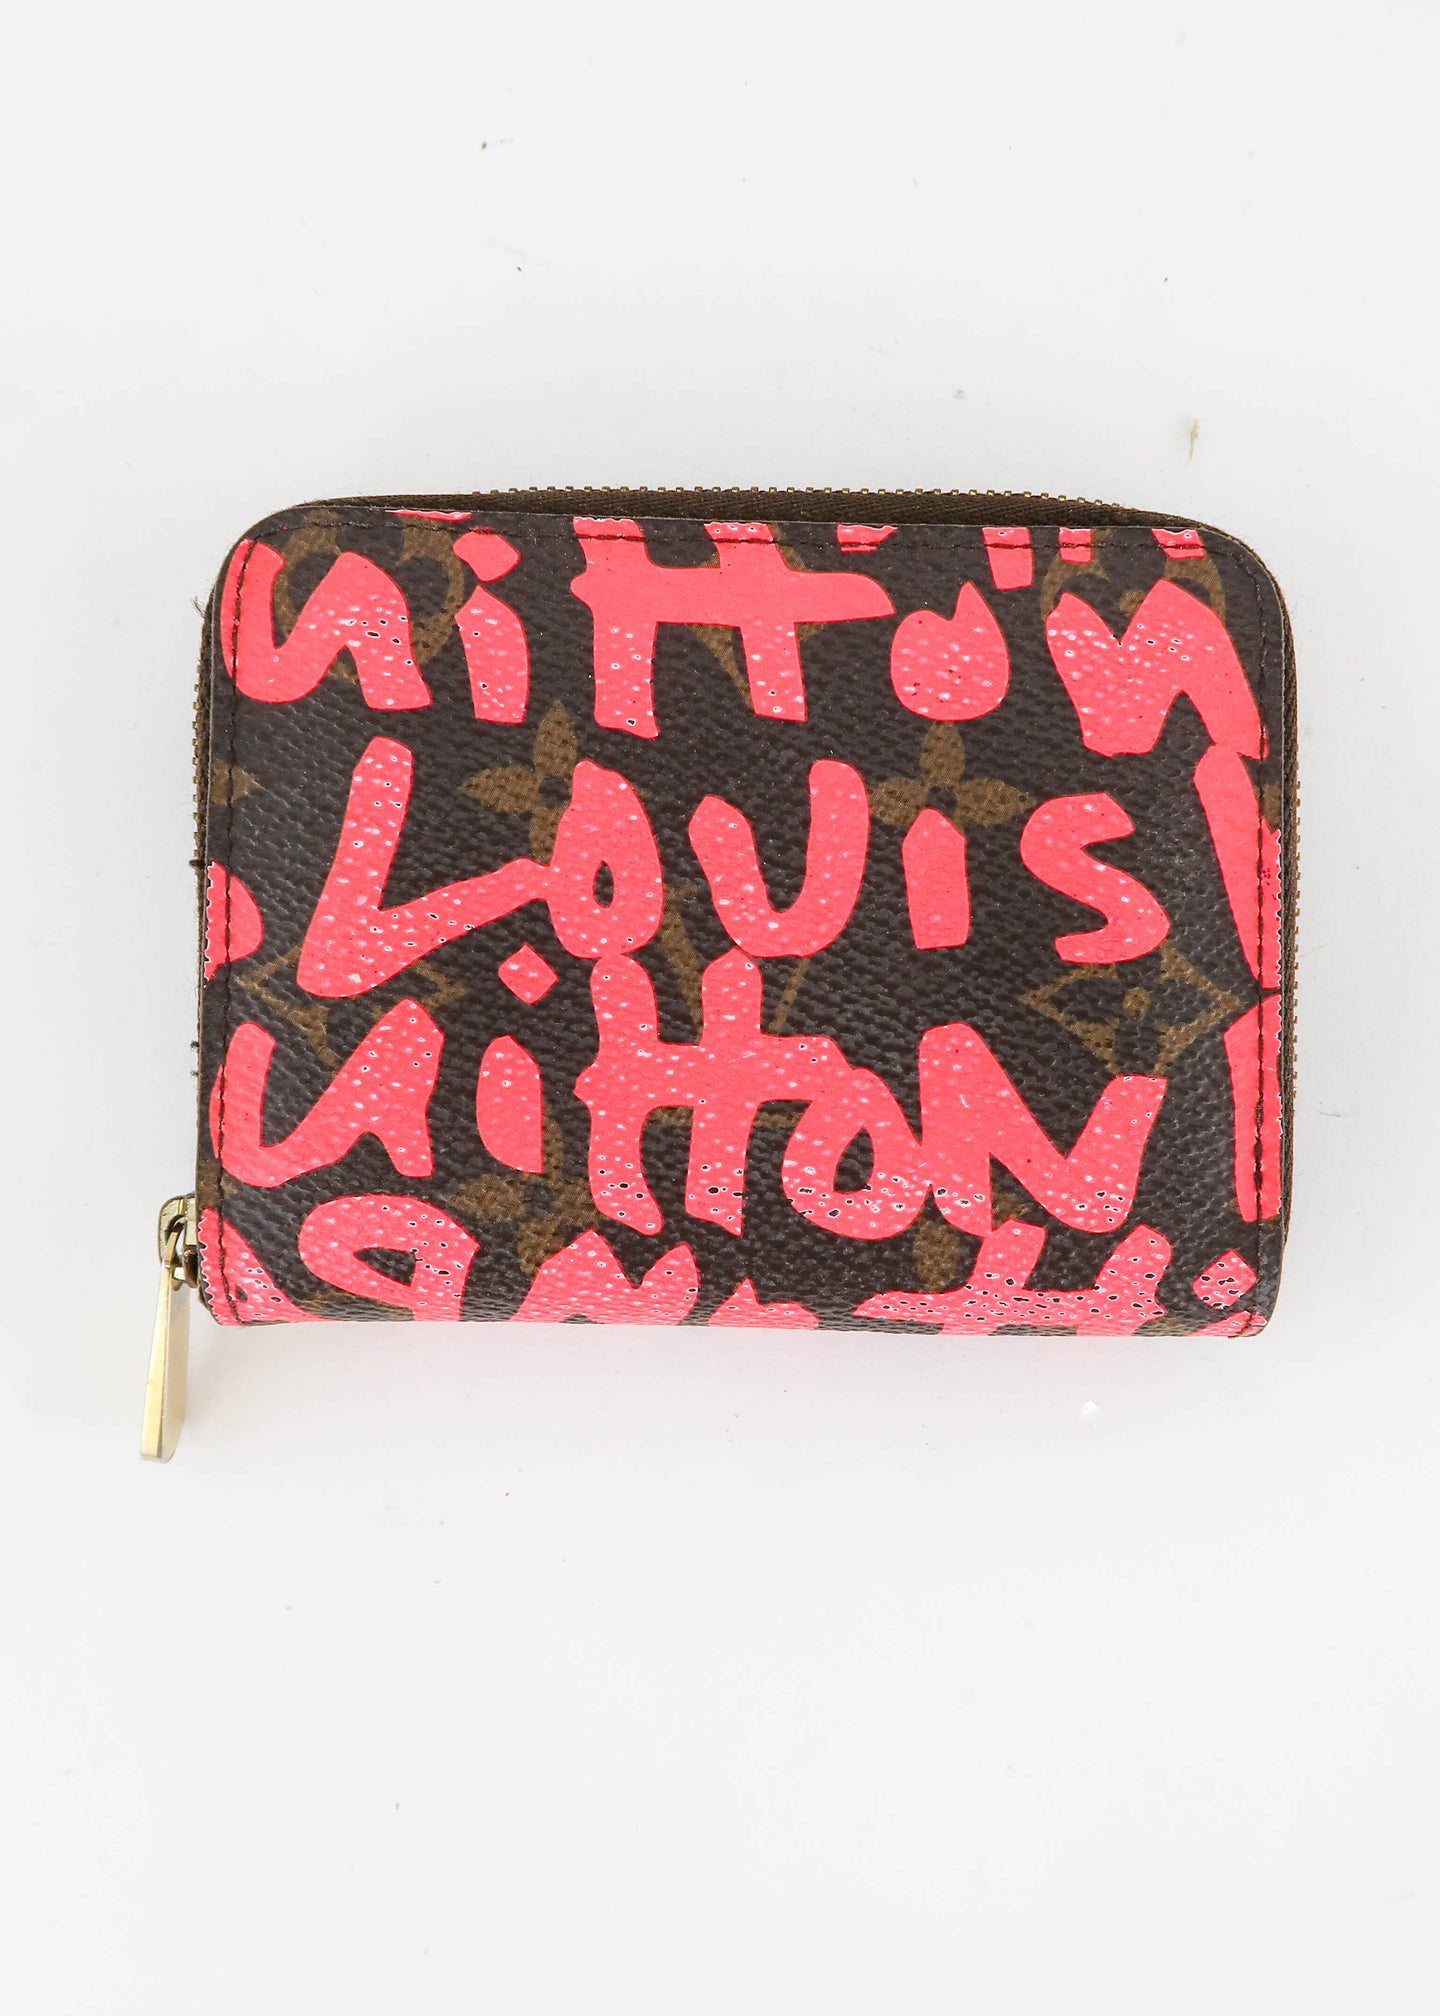 Pink Thing of The Day: Louis Vuitton Stephen Sprouse' Graffiti